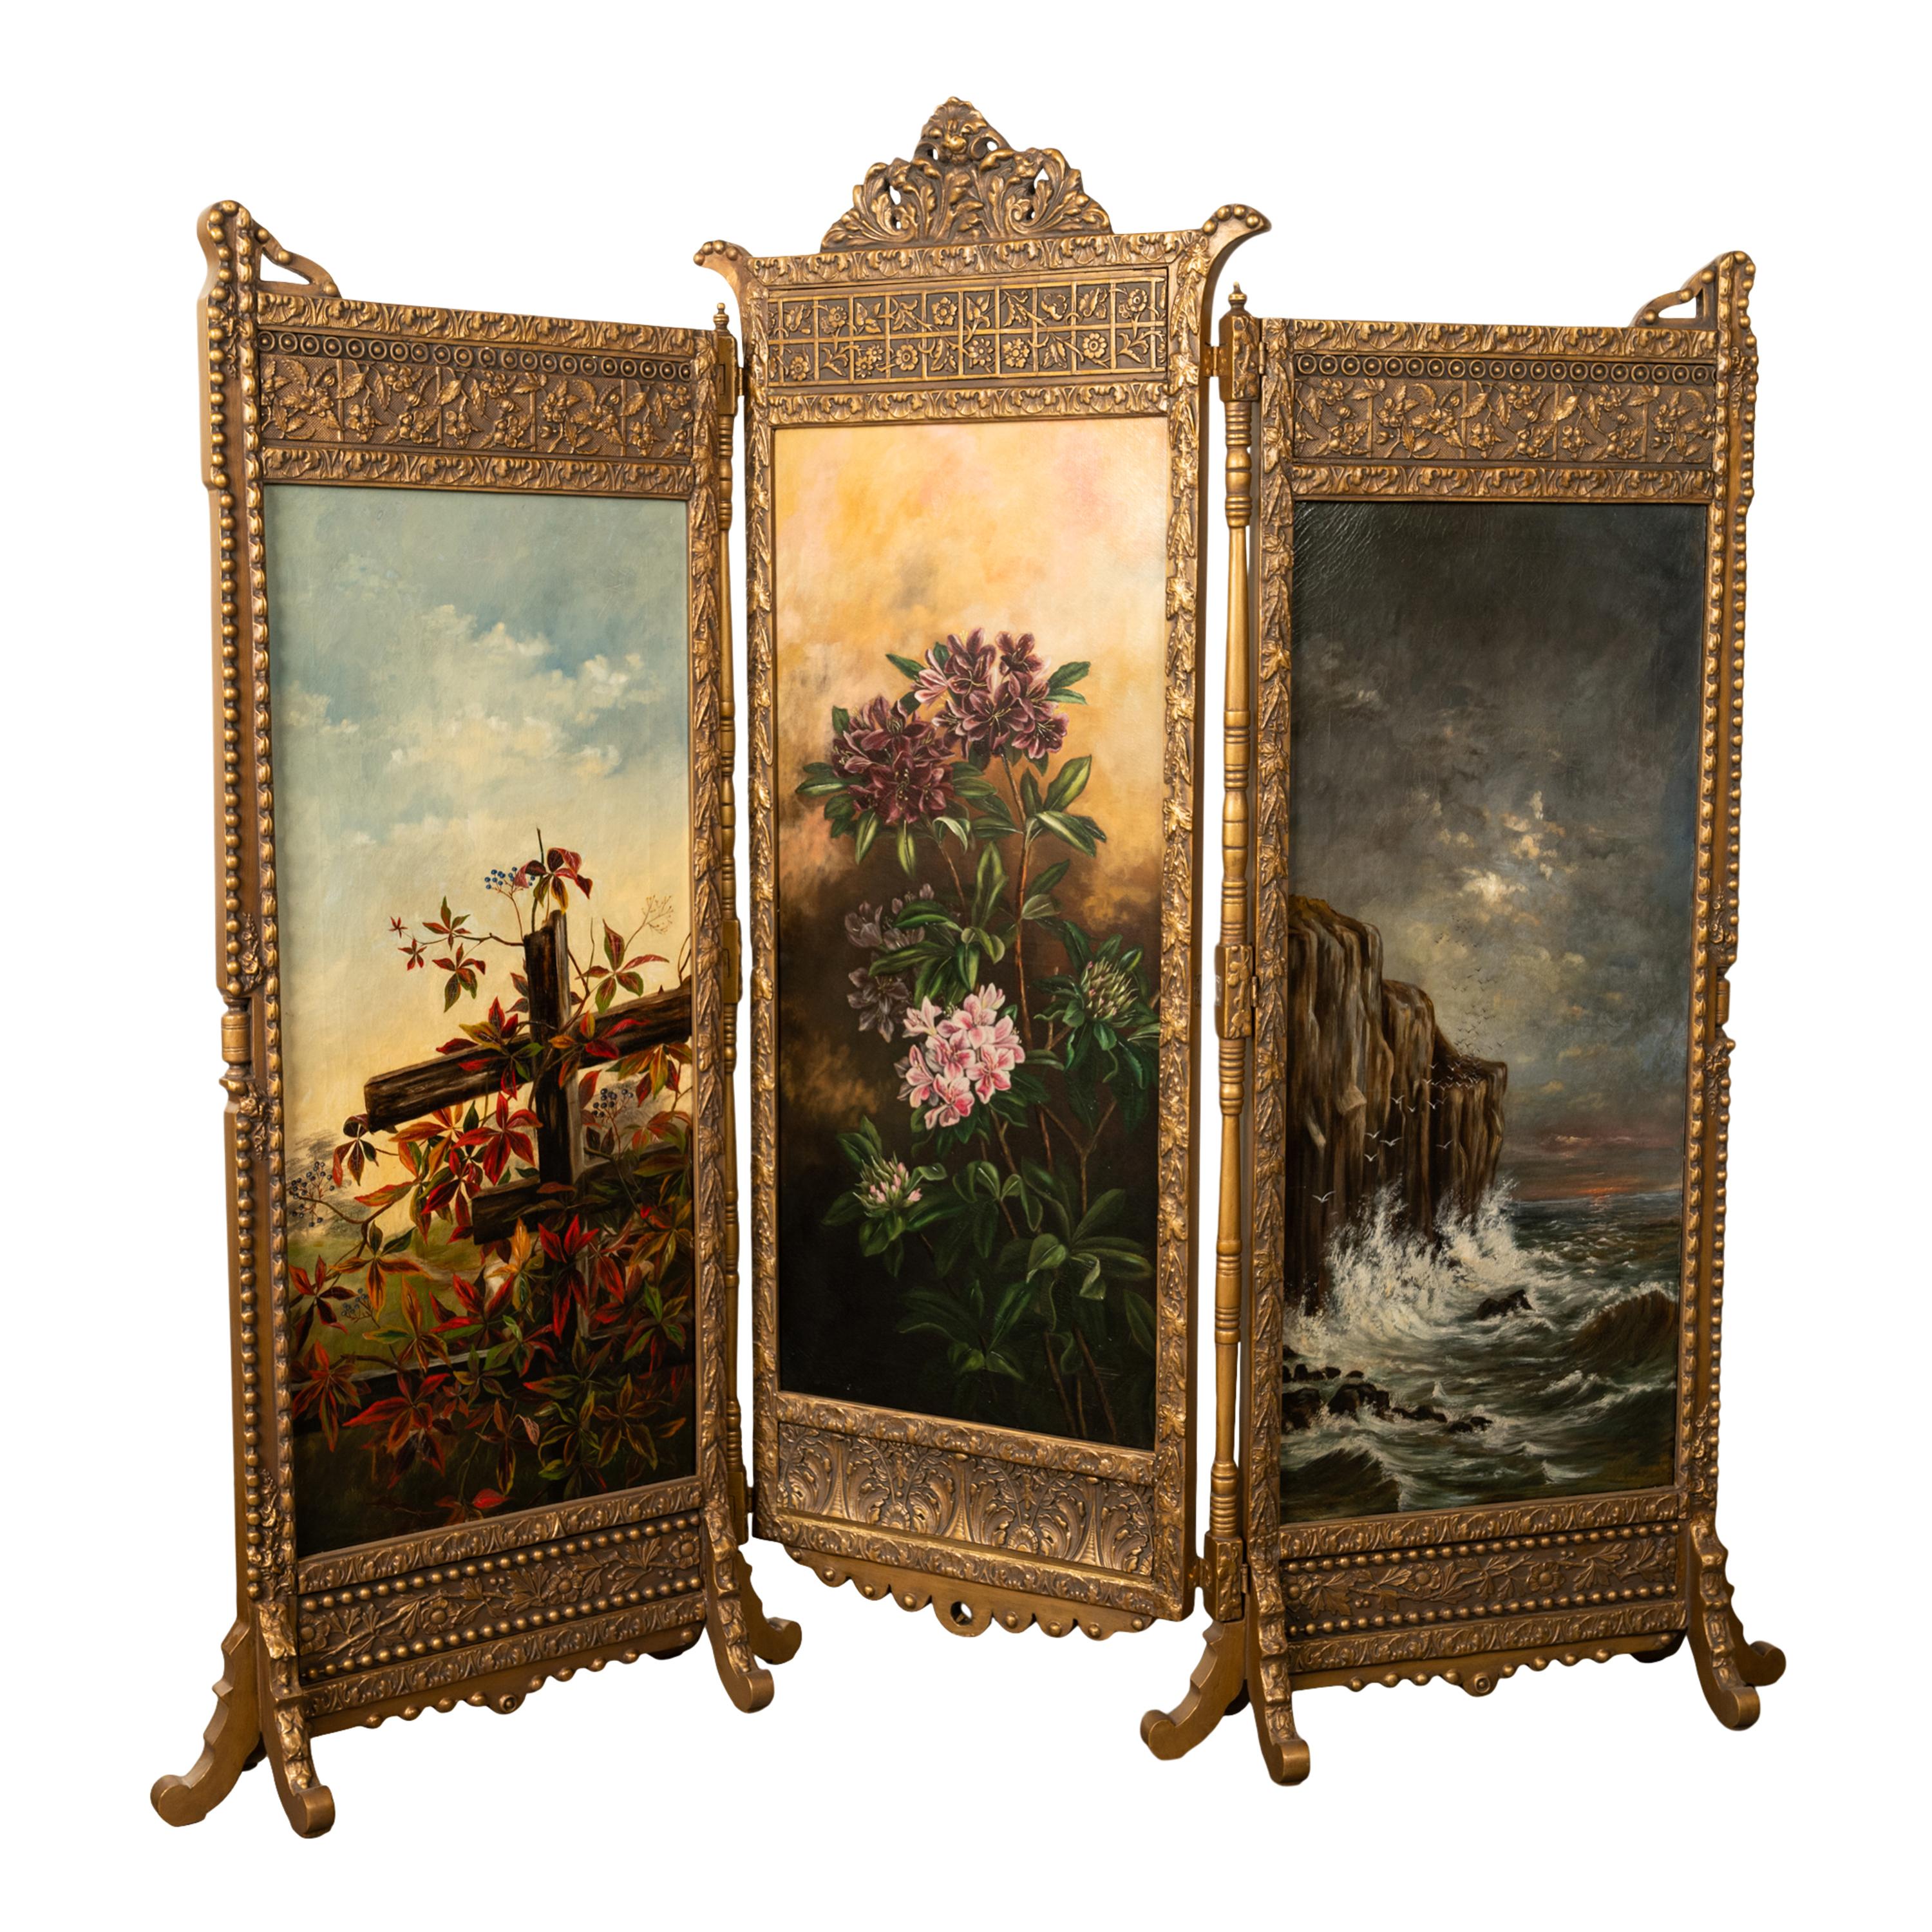 A fine & rare antique American Aesthetic Movement gilded three panel room divider screen, with three original oil paintings, 1885, from the estate of J.D. Rockefeller, New York.
The three fold screen having gilt bronze gesso decoration in the